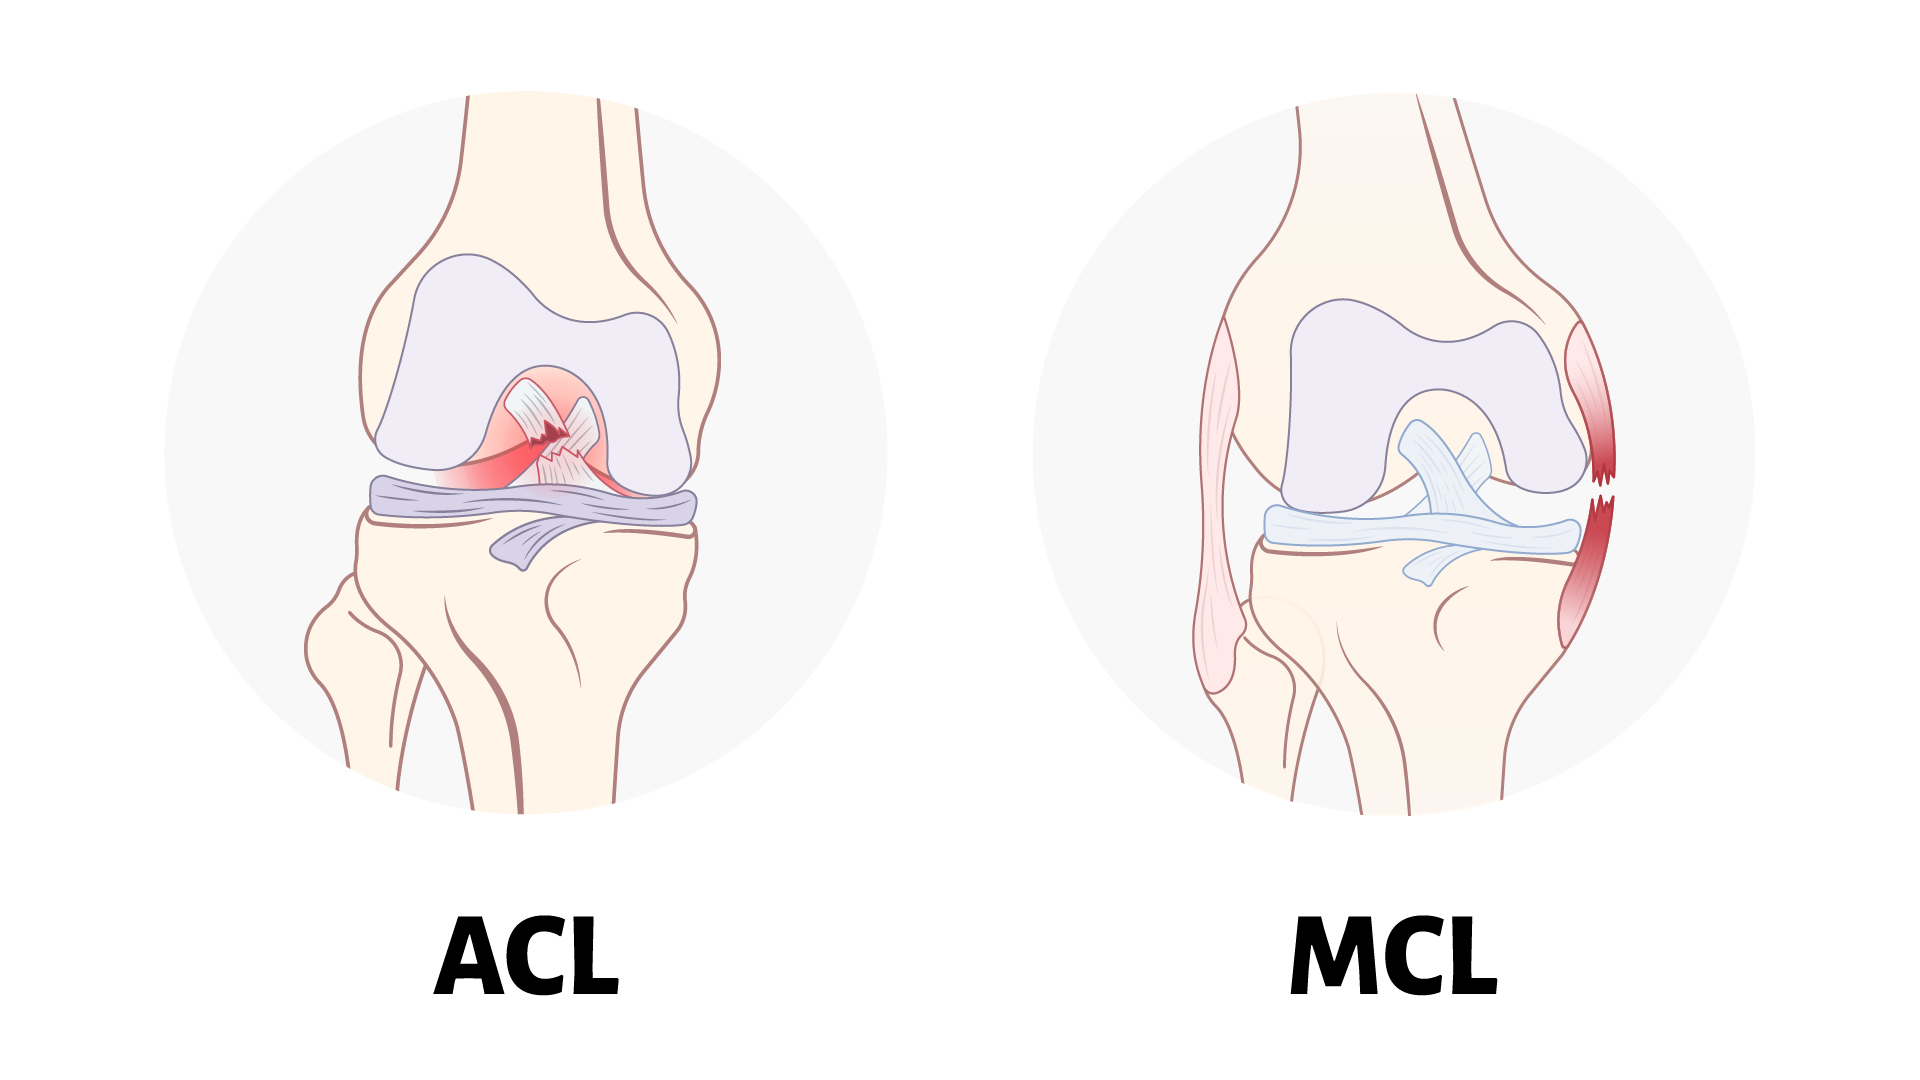 An educational rendering of the ACL and MCL with a diagram of the joints and ligaments